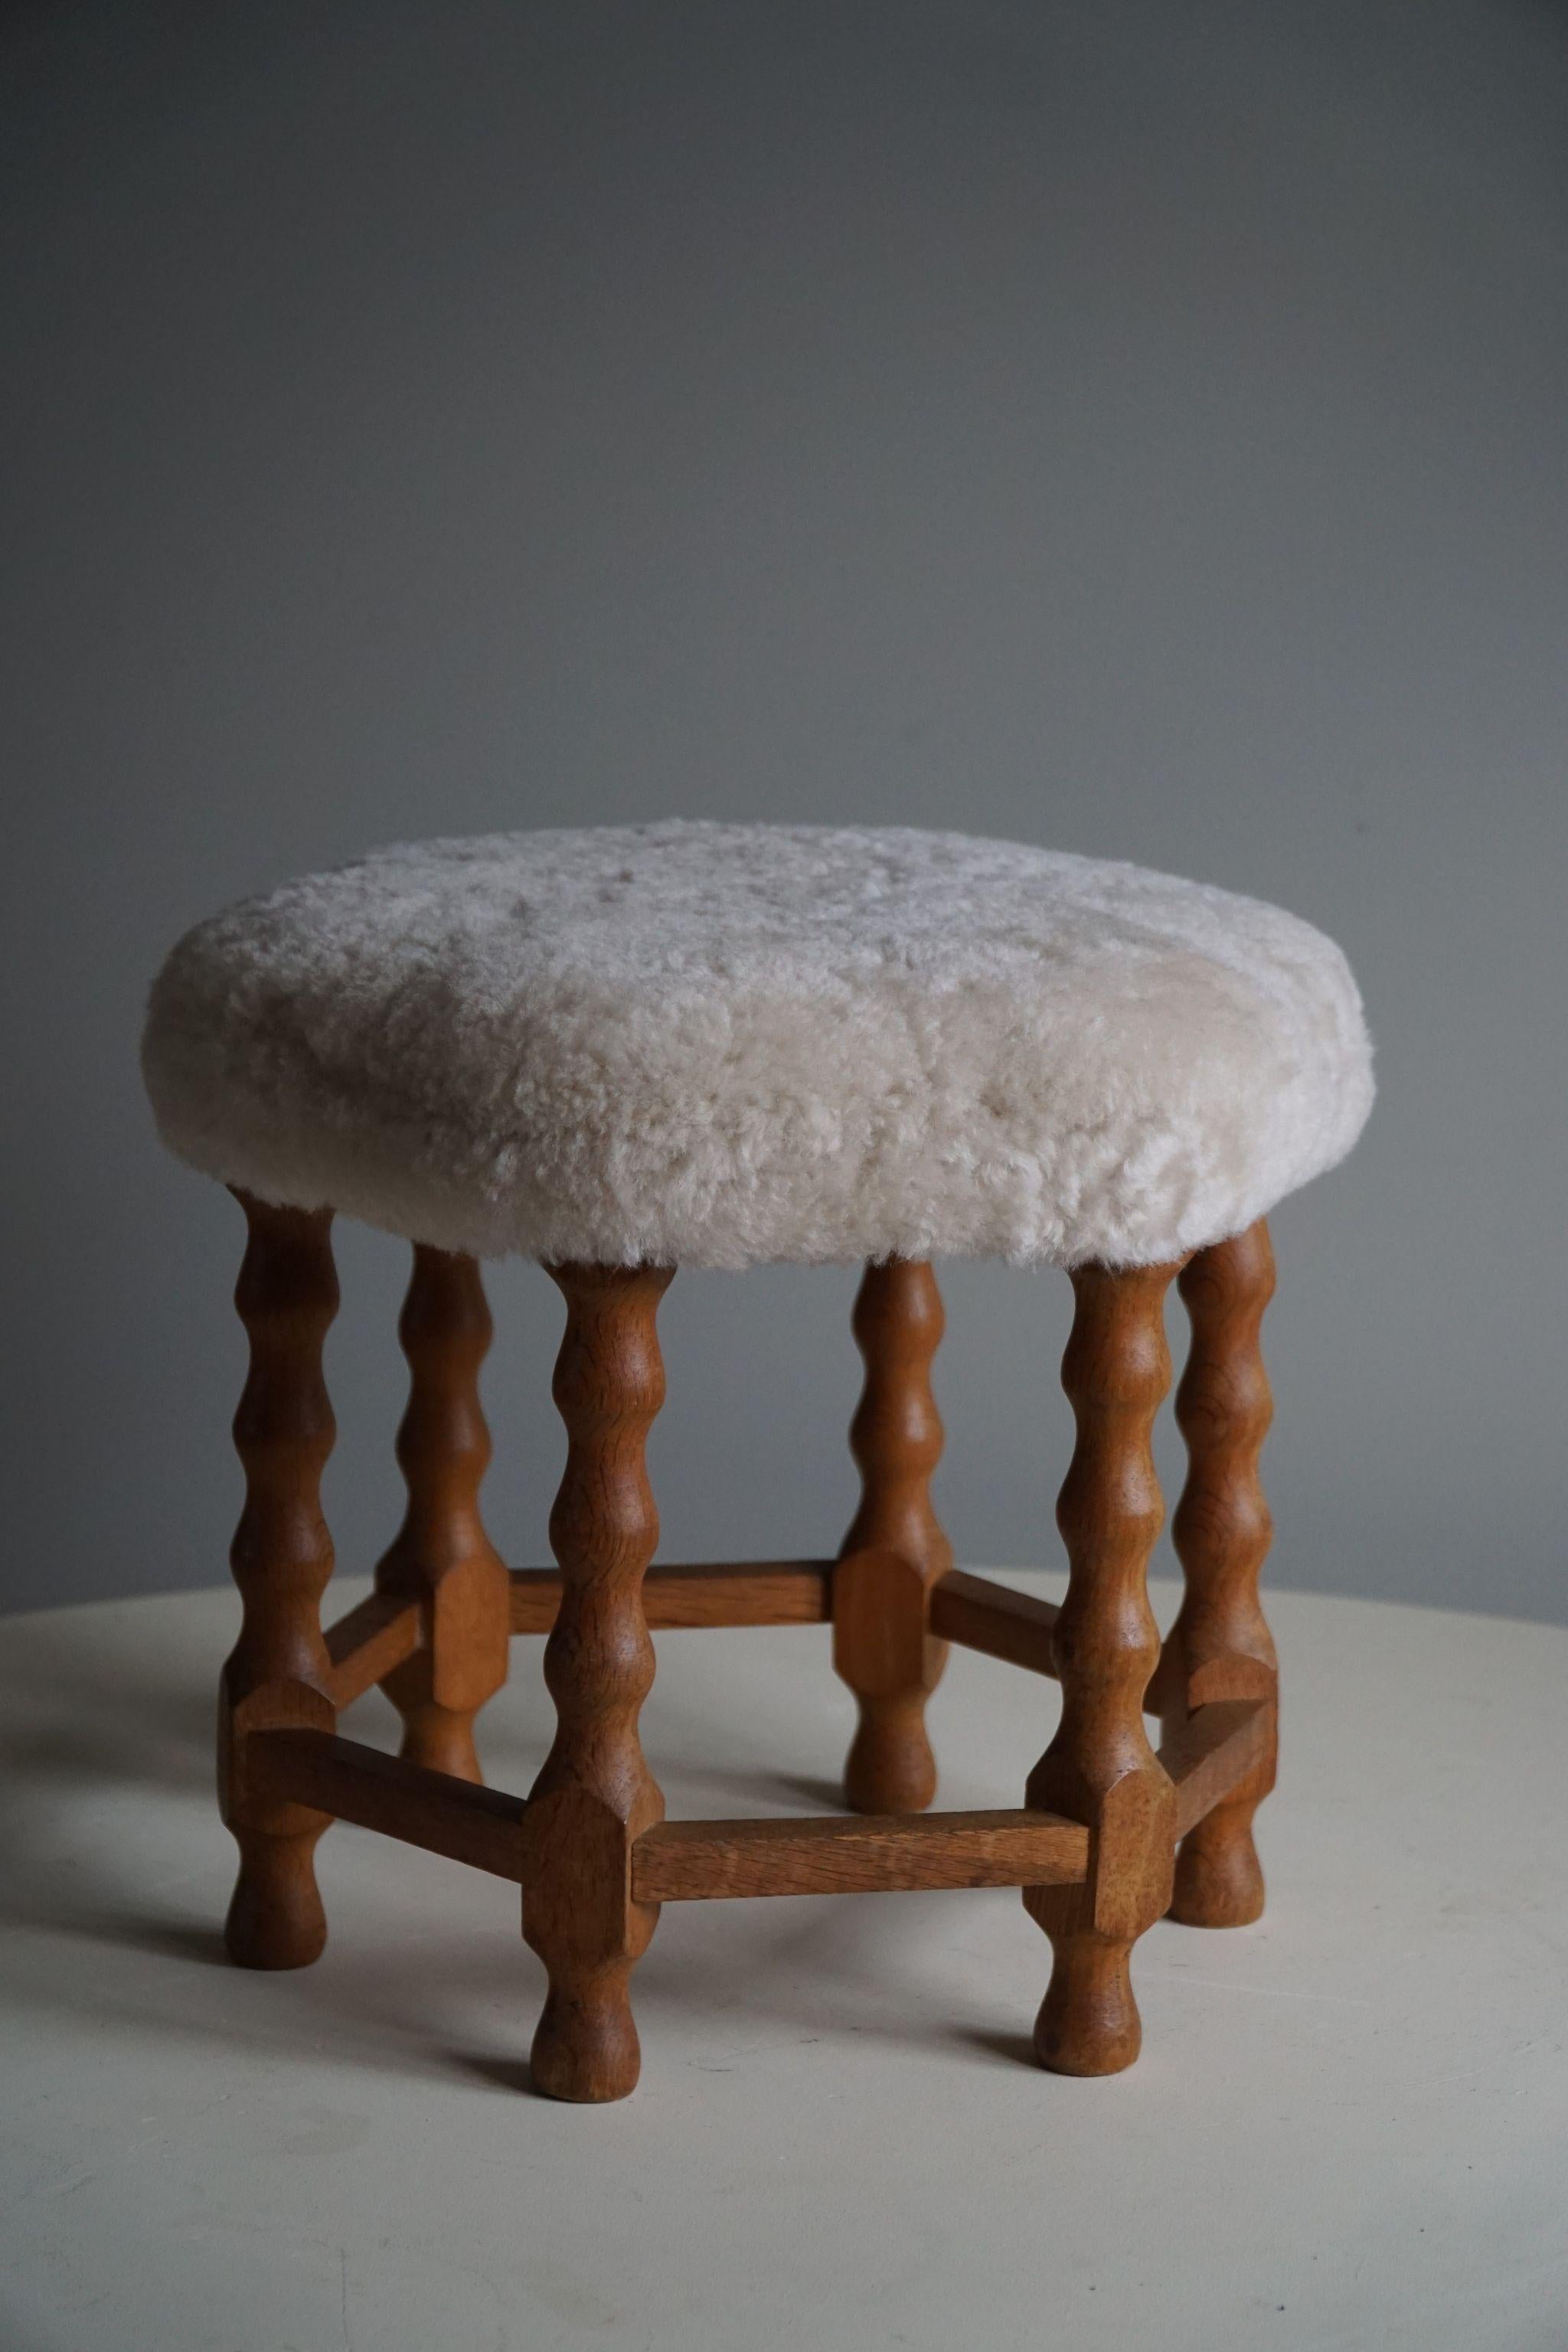 Danish Modern, A Hexagon Stool in Oak, Reupholstered Seat in Lambswool, 1950s For Sale 5